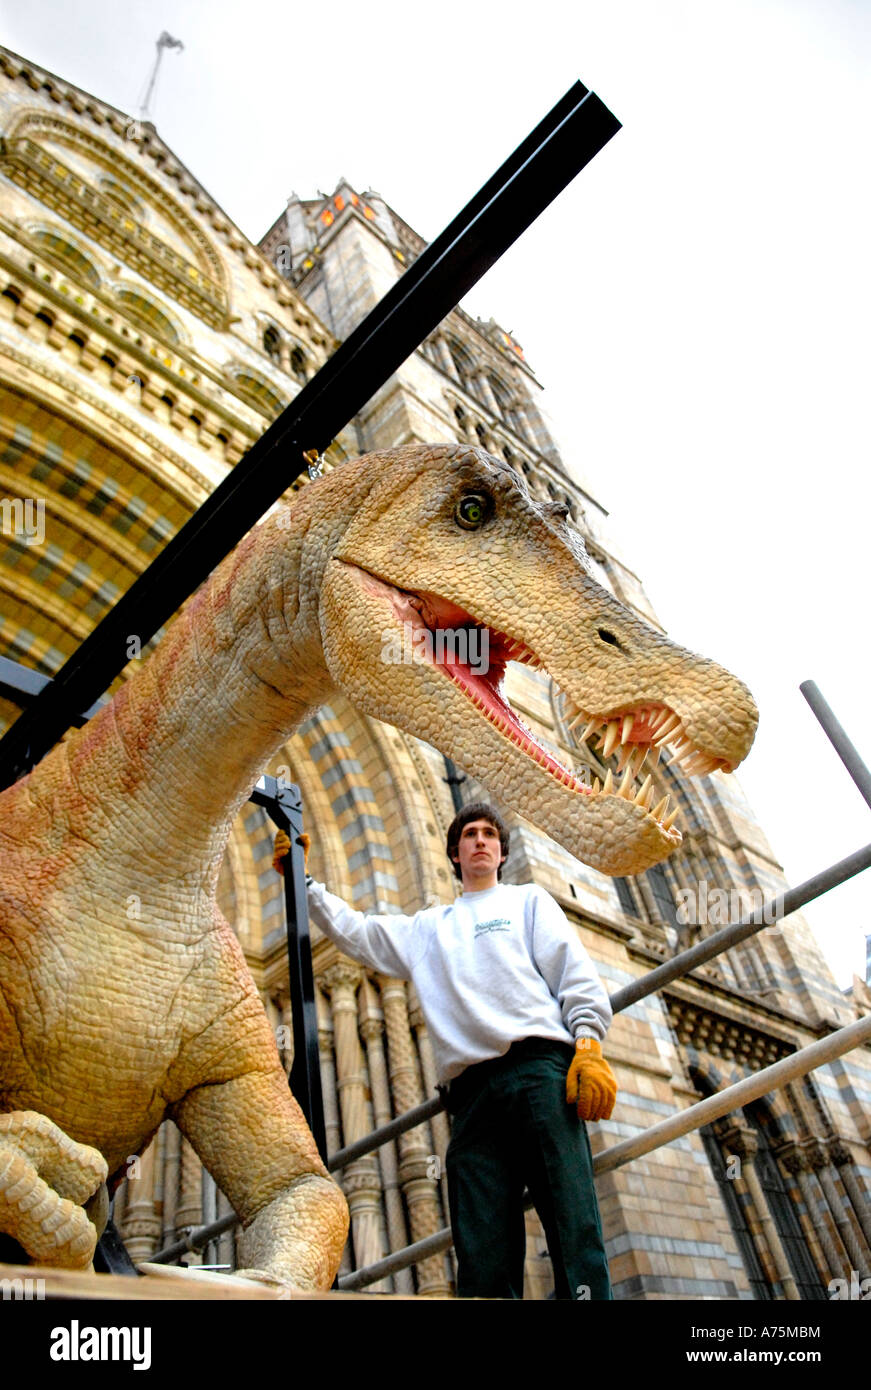 An animatronic Baryonix dinosaur is moved into the Natural History Museum by workers, South Kensington, London, England. April 2 Stock Photo